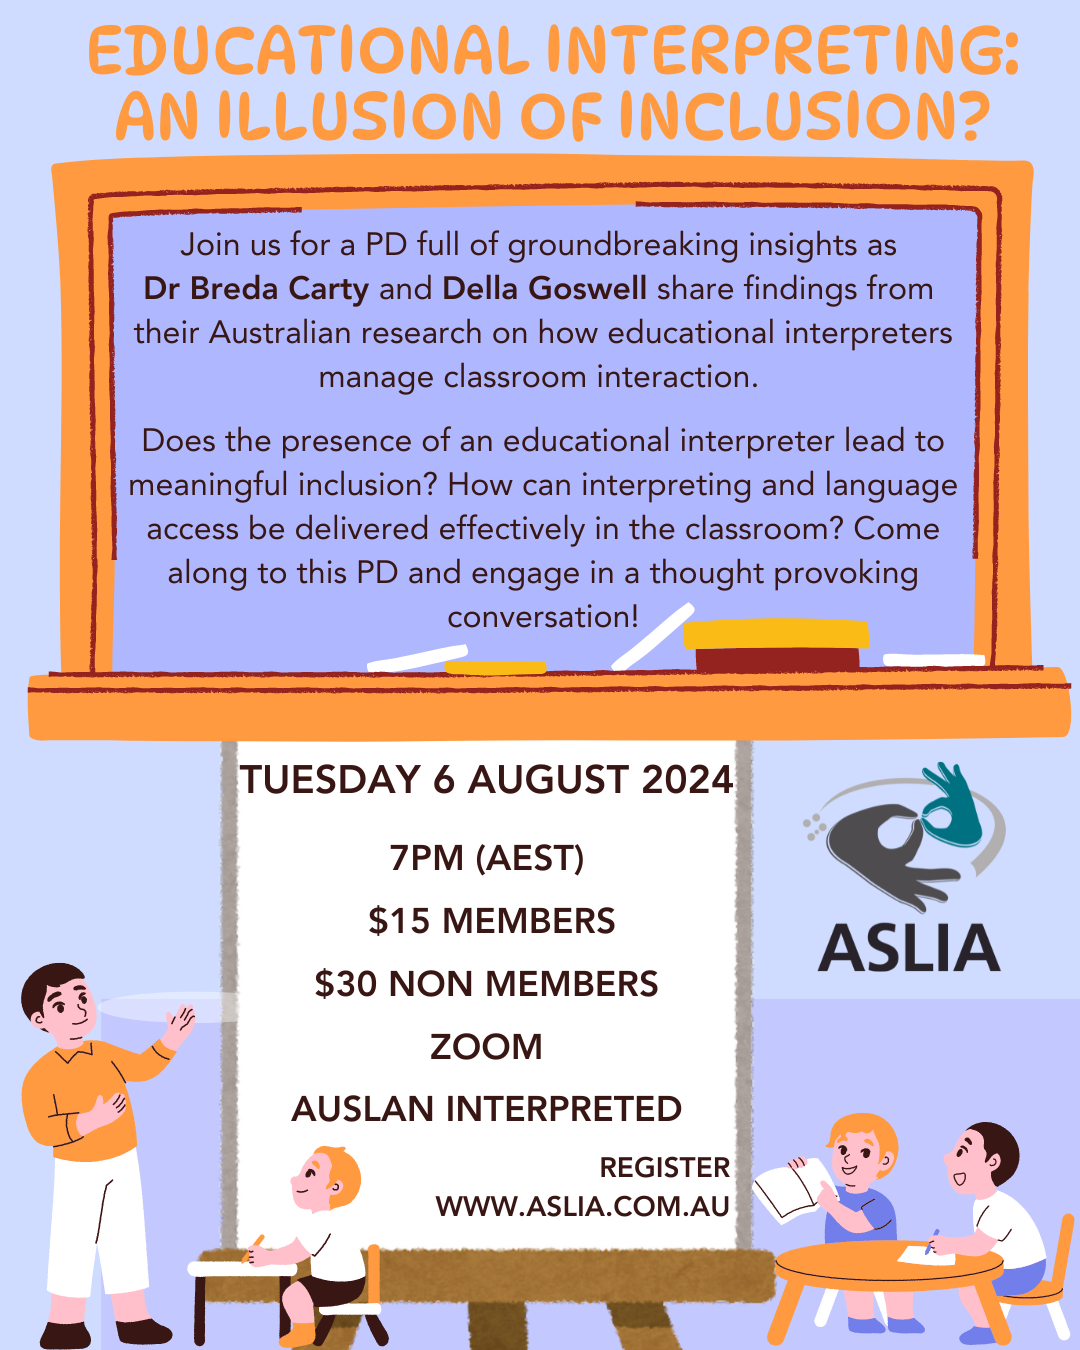 Educational Interpreting: An Illusion of Inclusion?